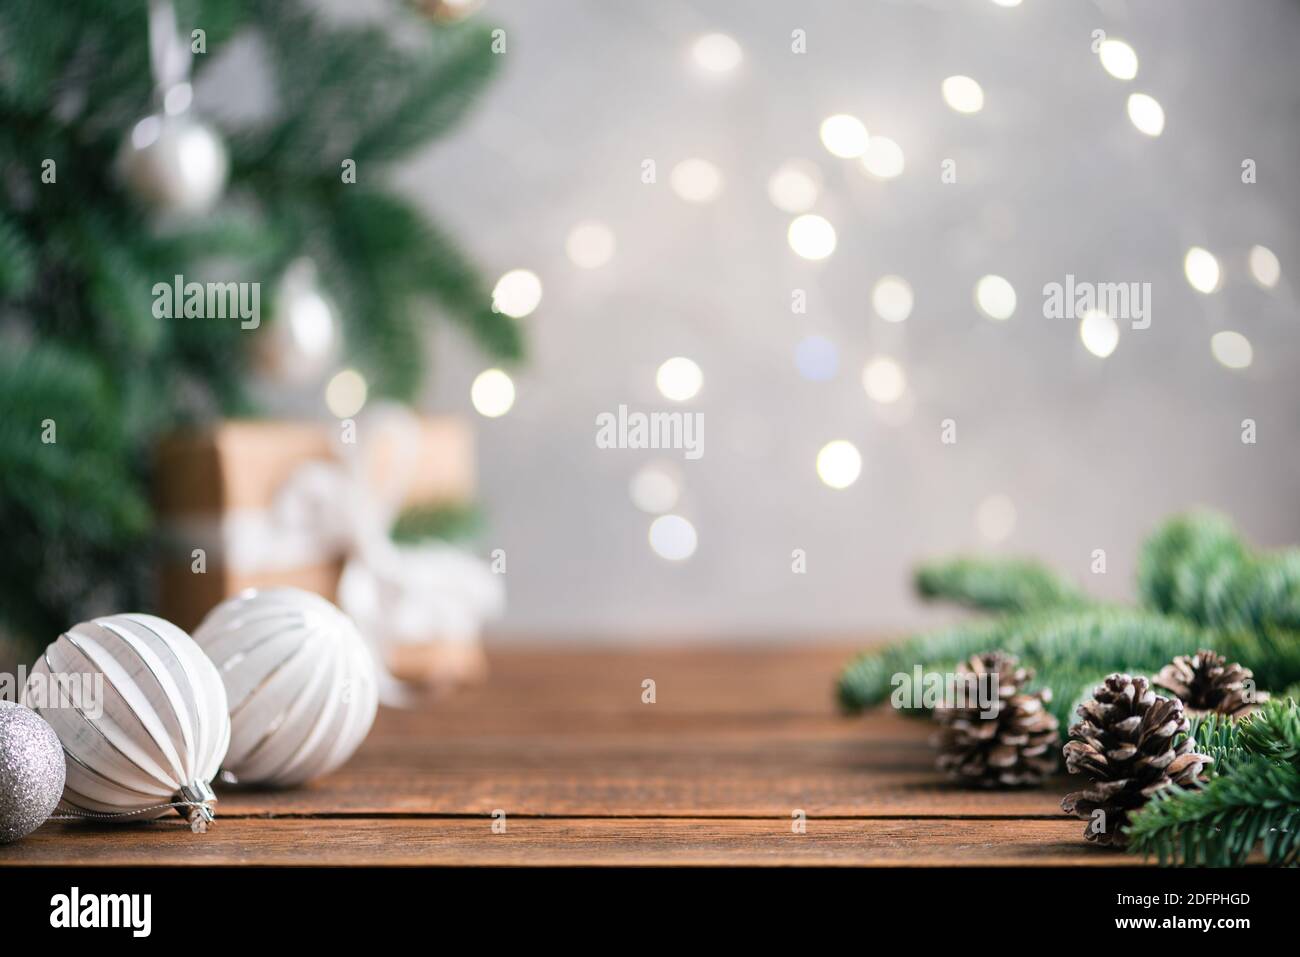 Christmas Background With Christmas Lights, Fir Tree, Toys. Copy Space For Text Or Design Stock Photo